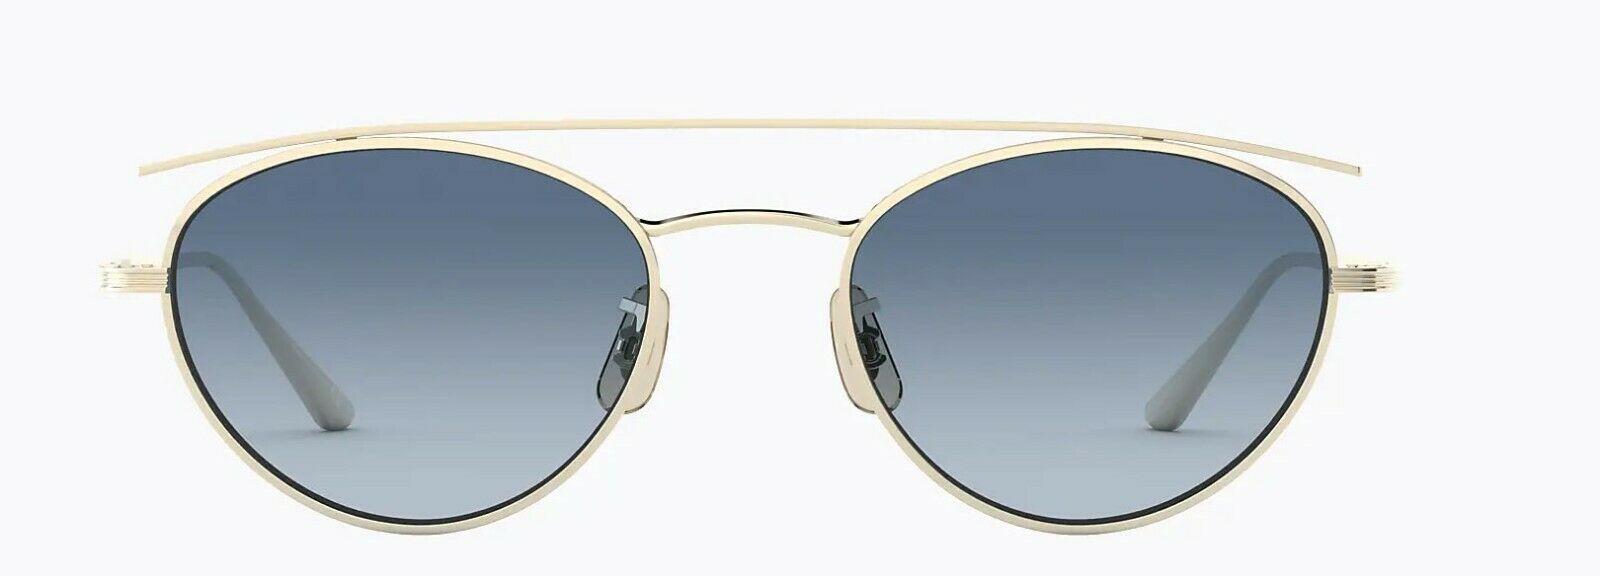 Oliver Peoples Sunglasses 1258ST 5035Q8 The Row Hightree Gold / Marine Gradient-827934432628-classypw.com-2